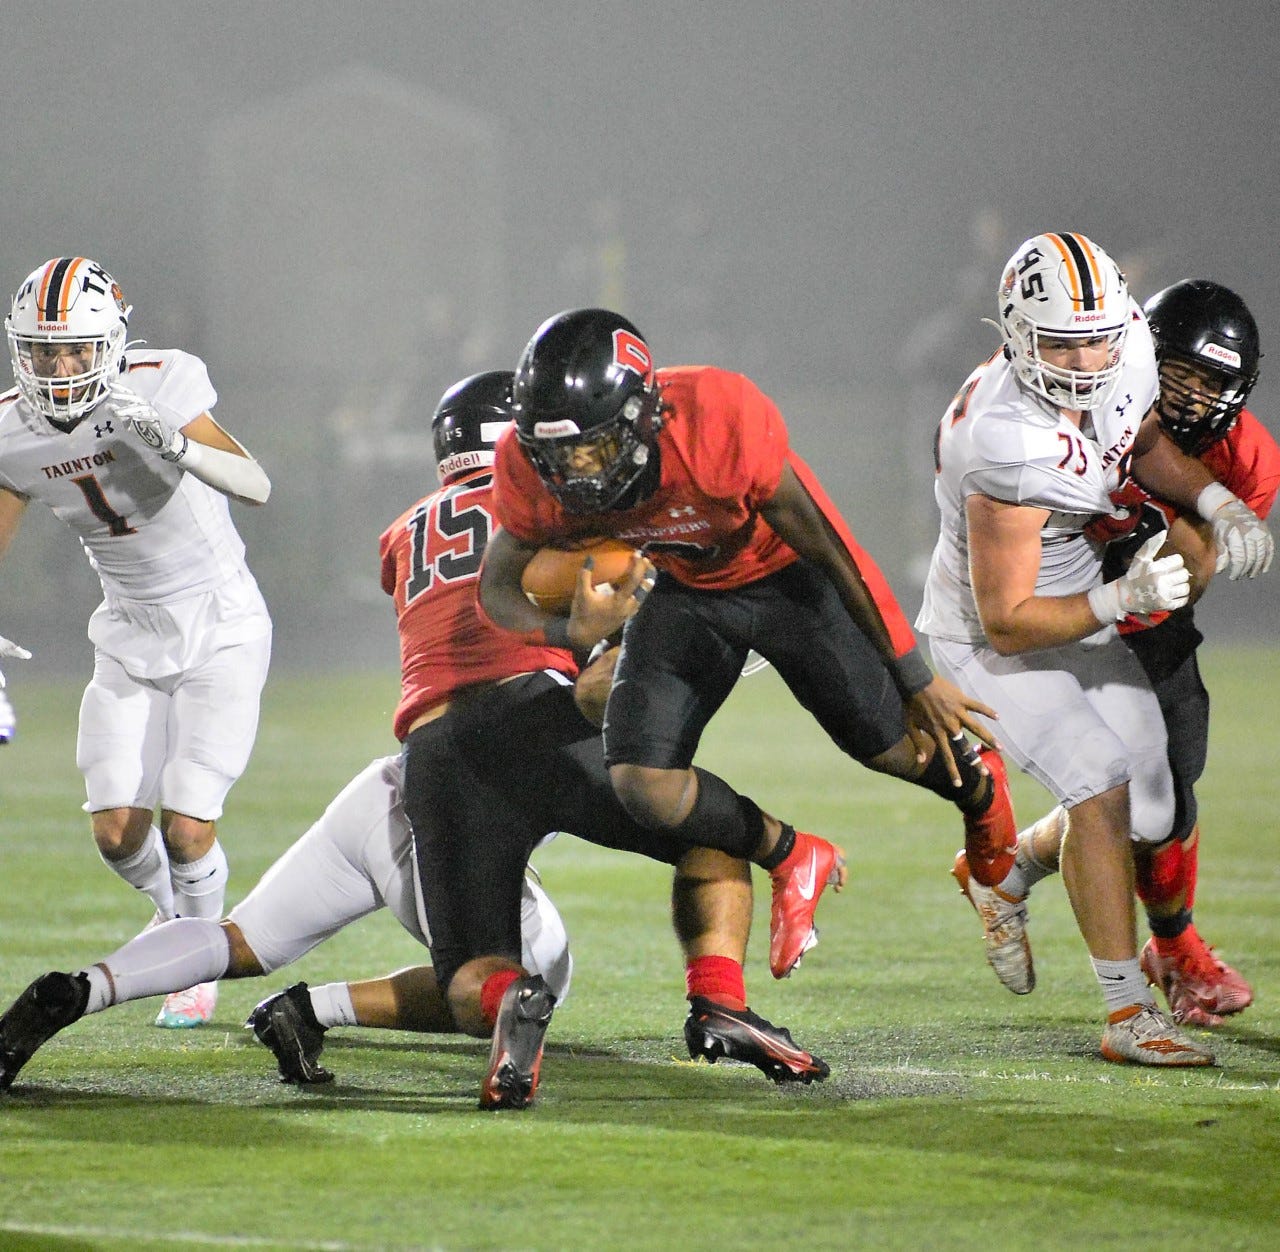 DURFEE FOOTBALL PREVIEW: Hilltoppers turn to key veterans